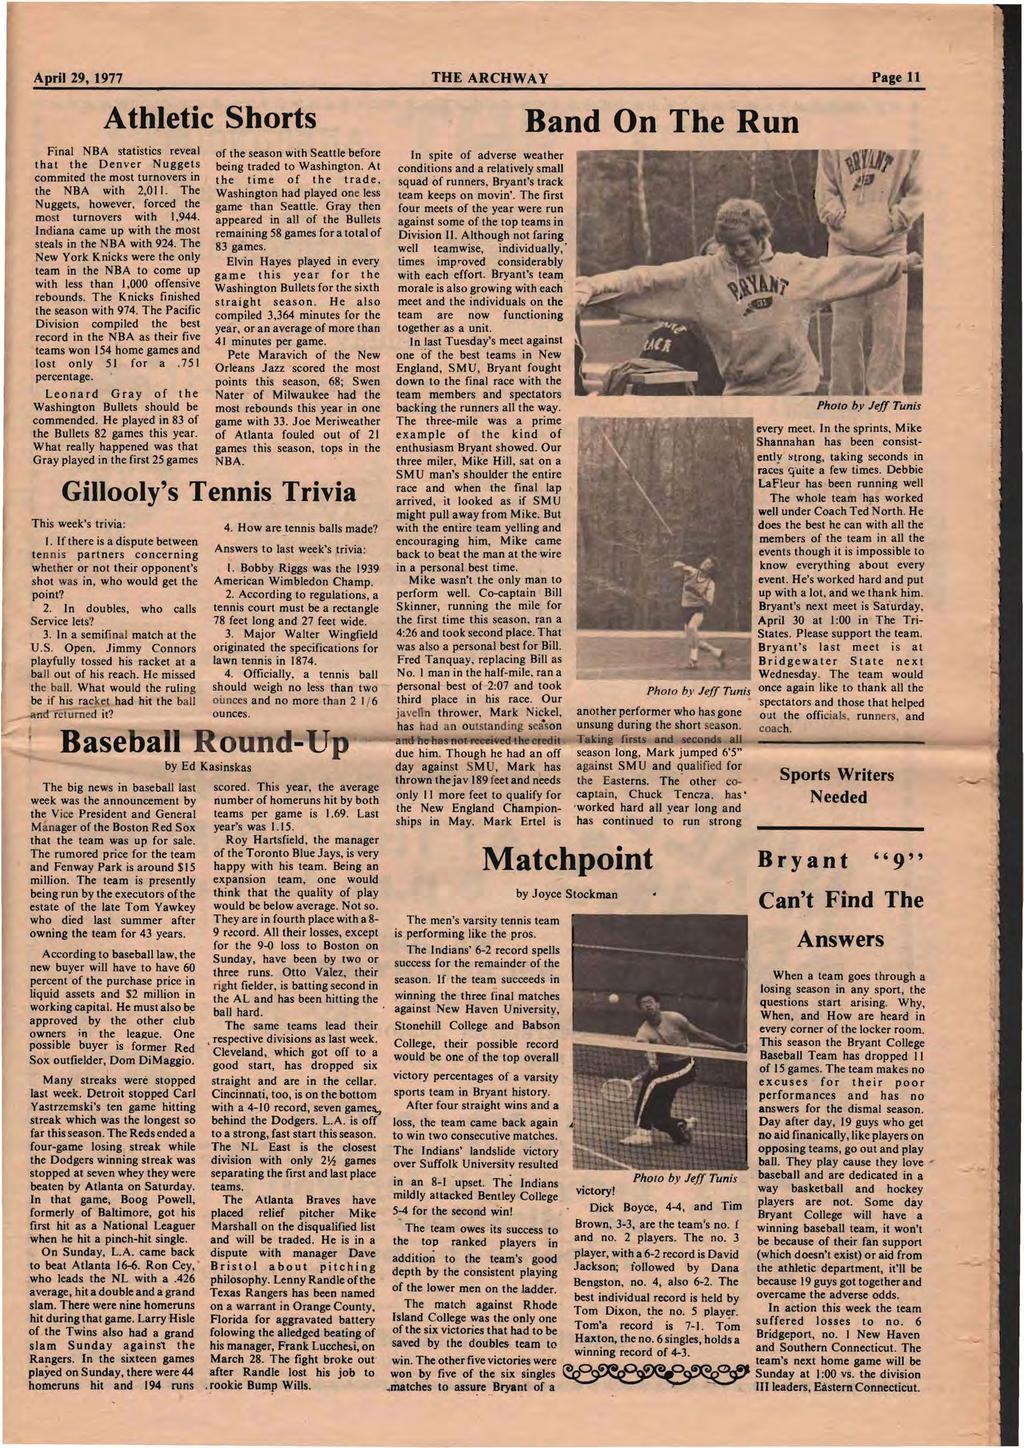 April 29, 1977 THE ARCHWAY Pge 11 Athletic Shorts Finl NBA sttistics revel of the seson with Settle before tht the Denver Nuggets being trded to Wshington.